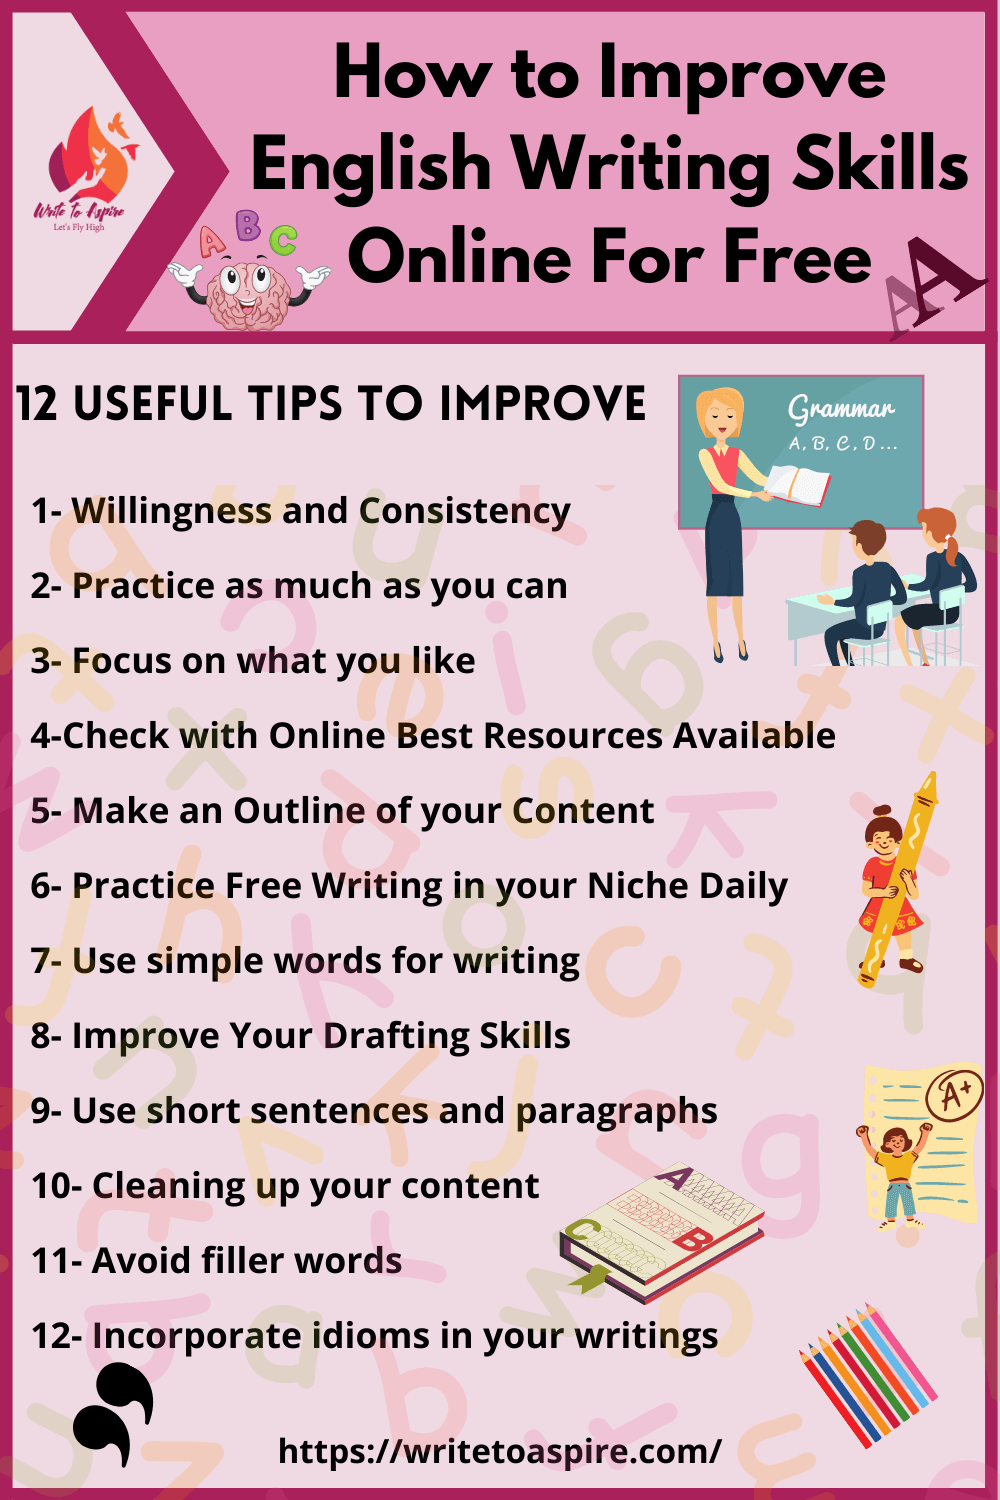 How to Improve English Writing Skills Online For Free- write to aspire